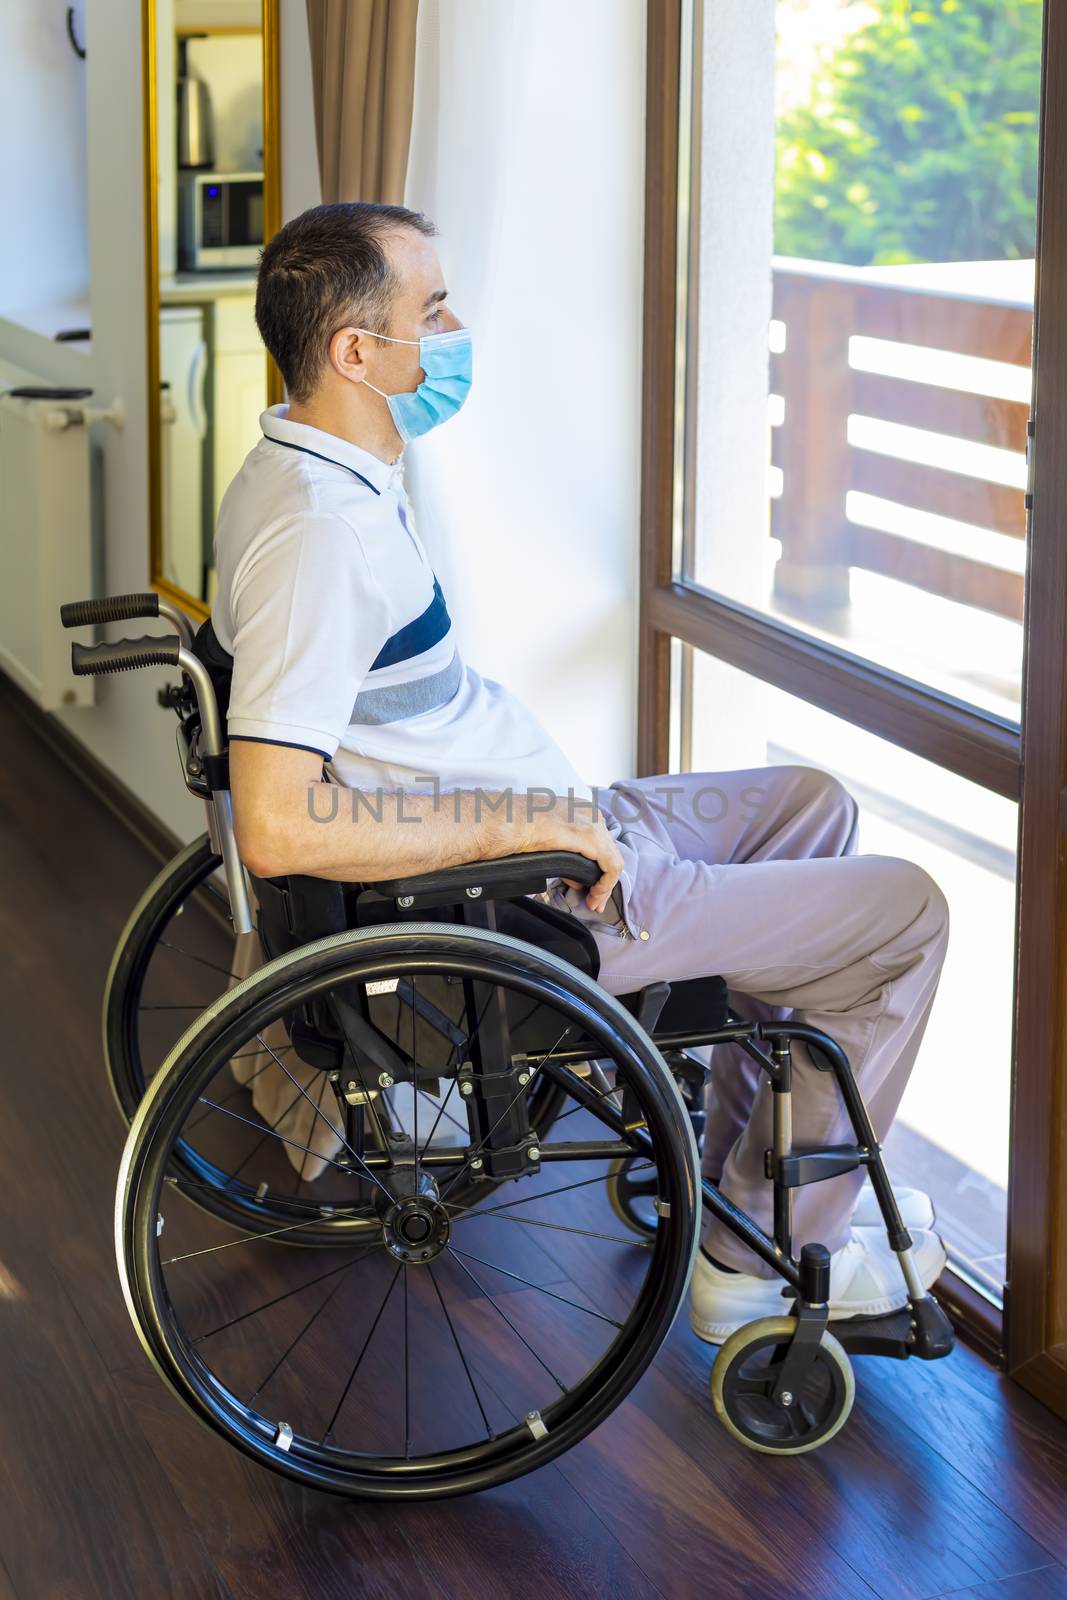 Lonely young man wearing face mask sitting in a wheelchair alone looking out the window. Focus on his face.